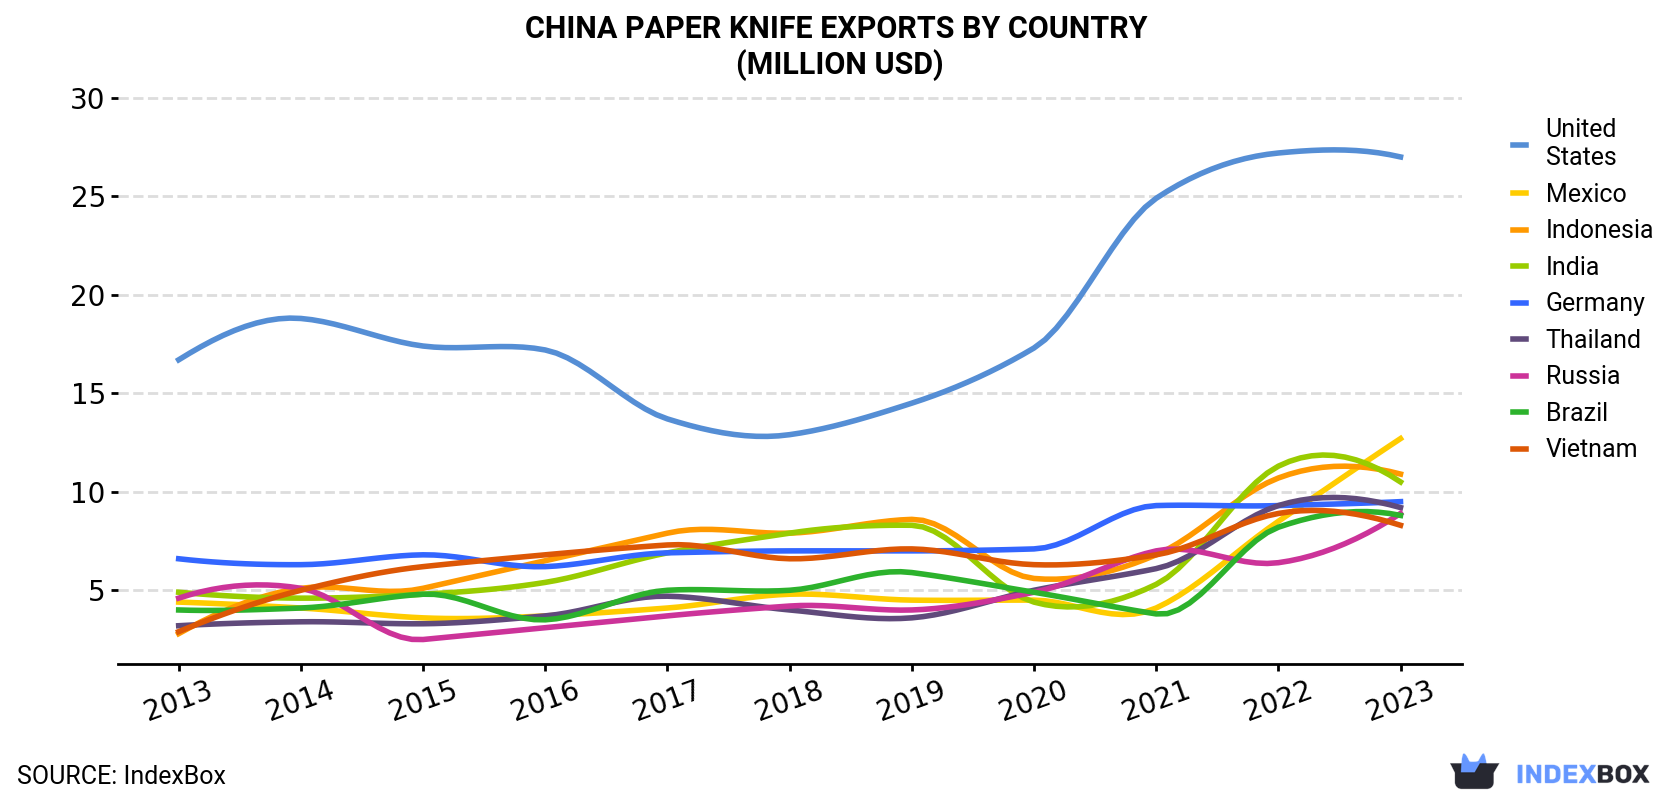 China Paper Knife Exports By Country (Million USD)